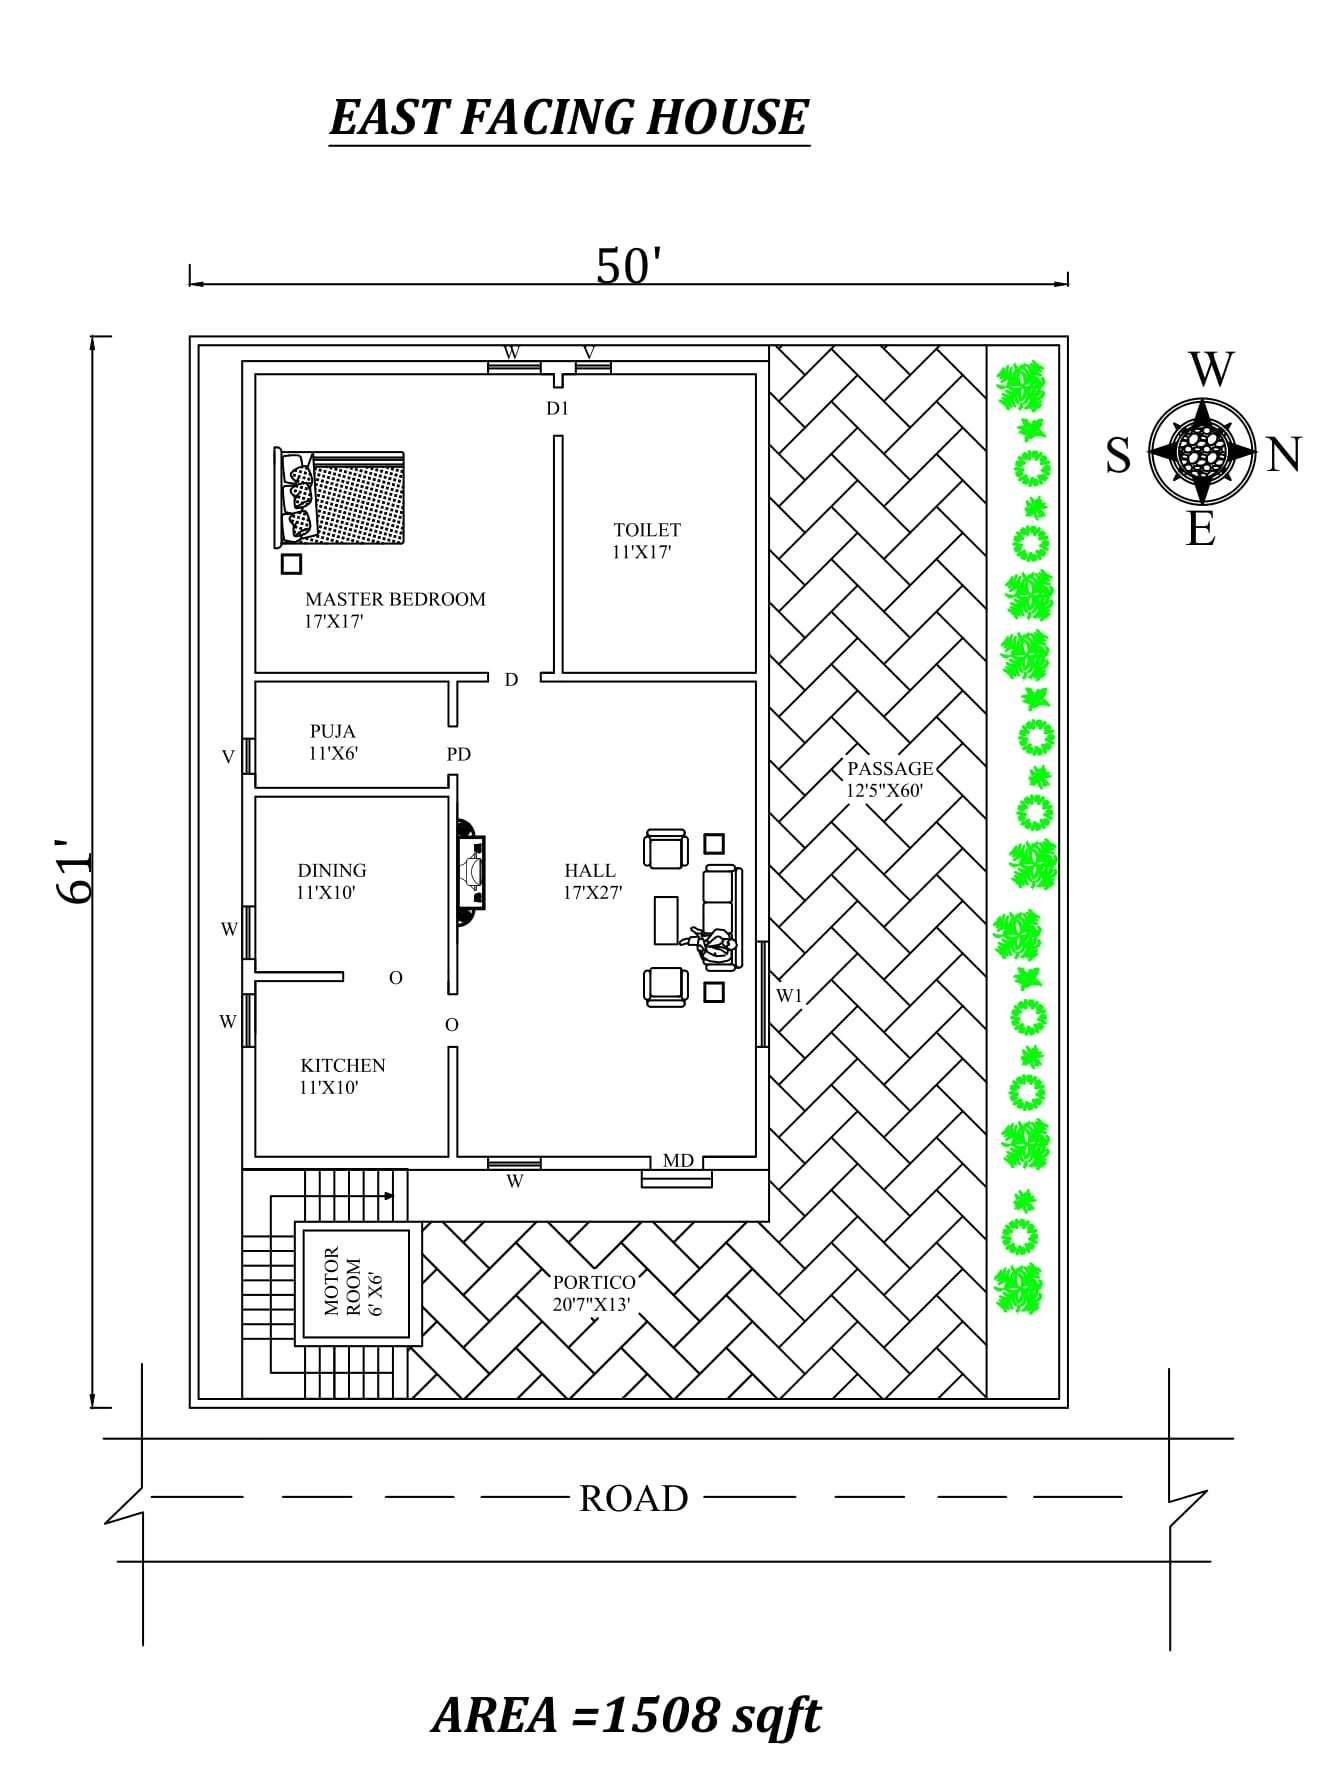 X Single Bhk East Facing House Plan As Per Vastu Shastra Autocad Dwg And Pdf File Details